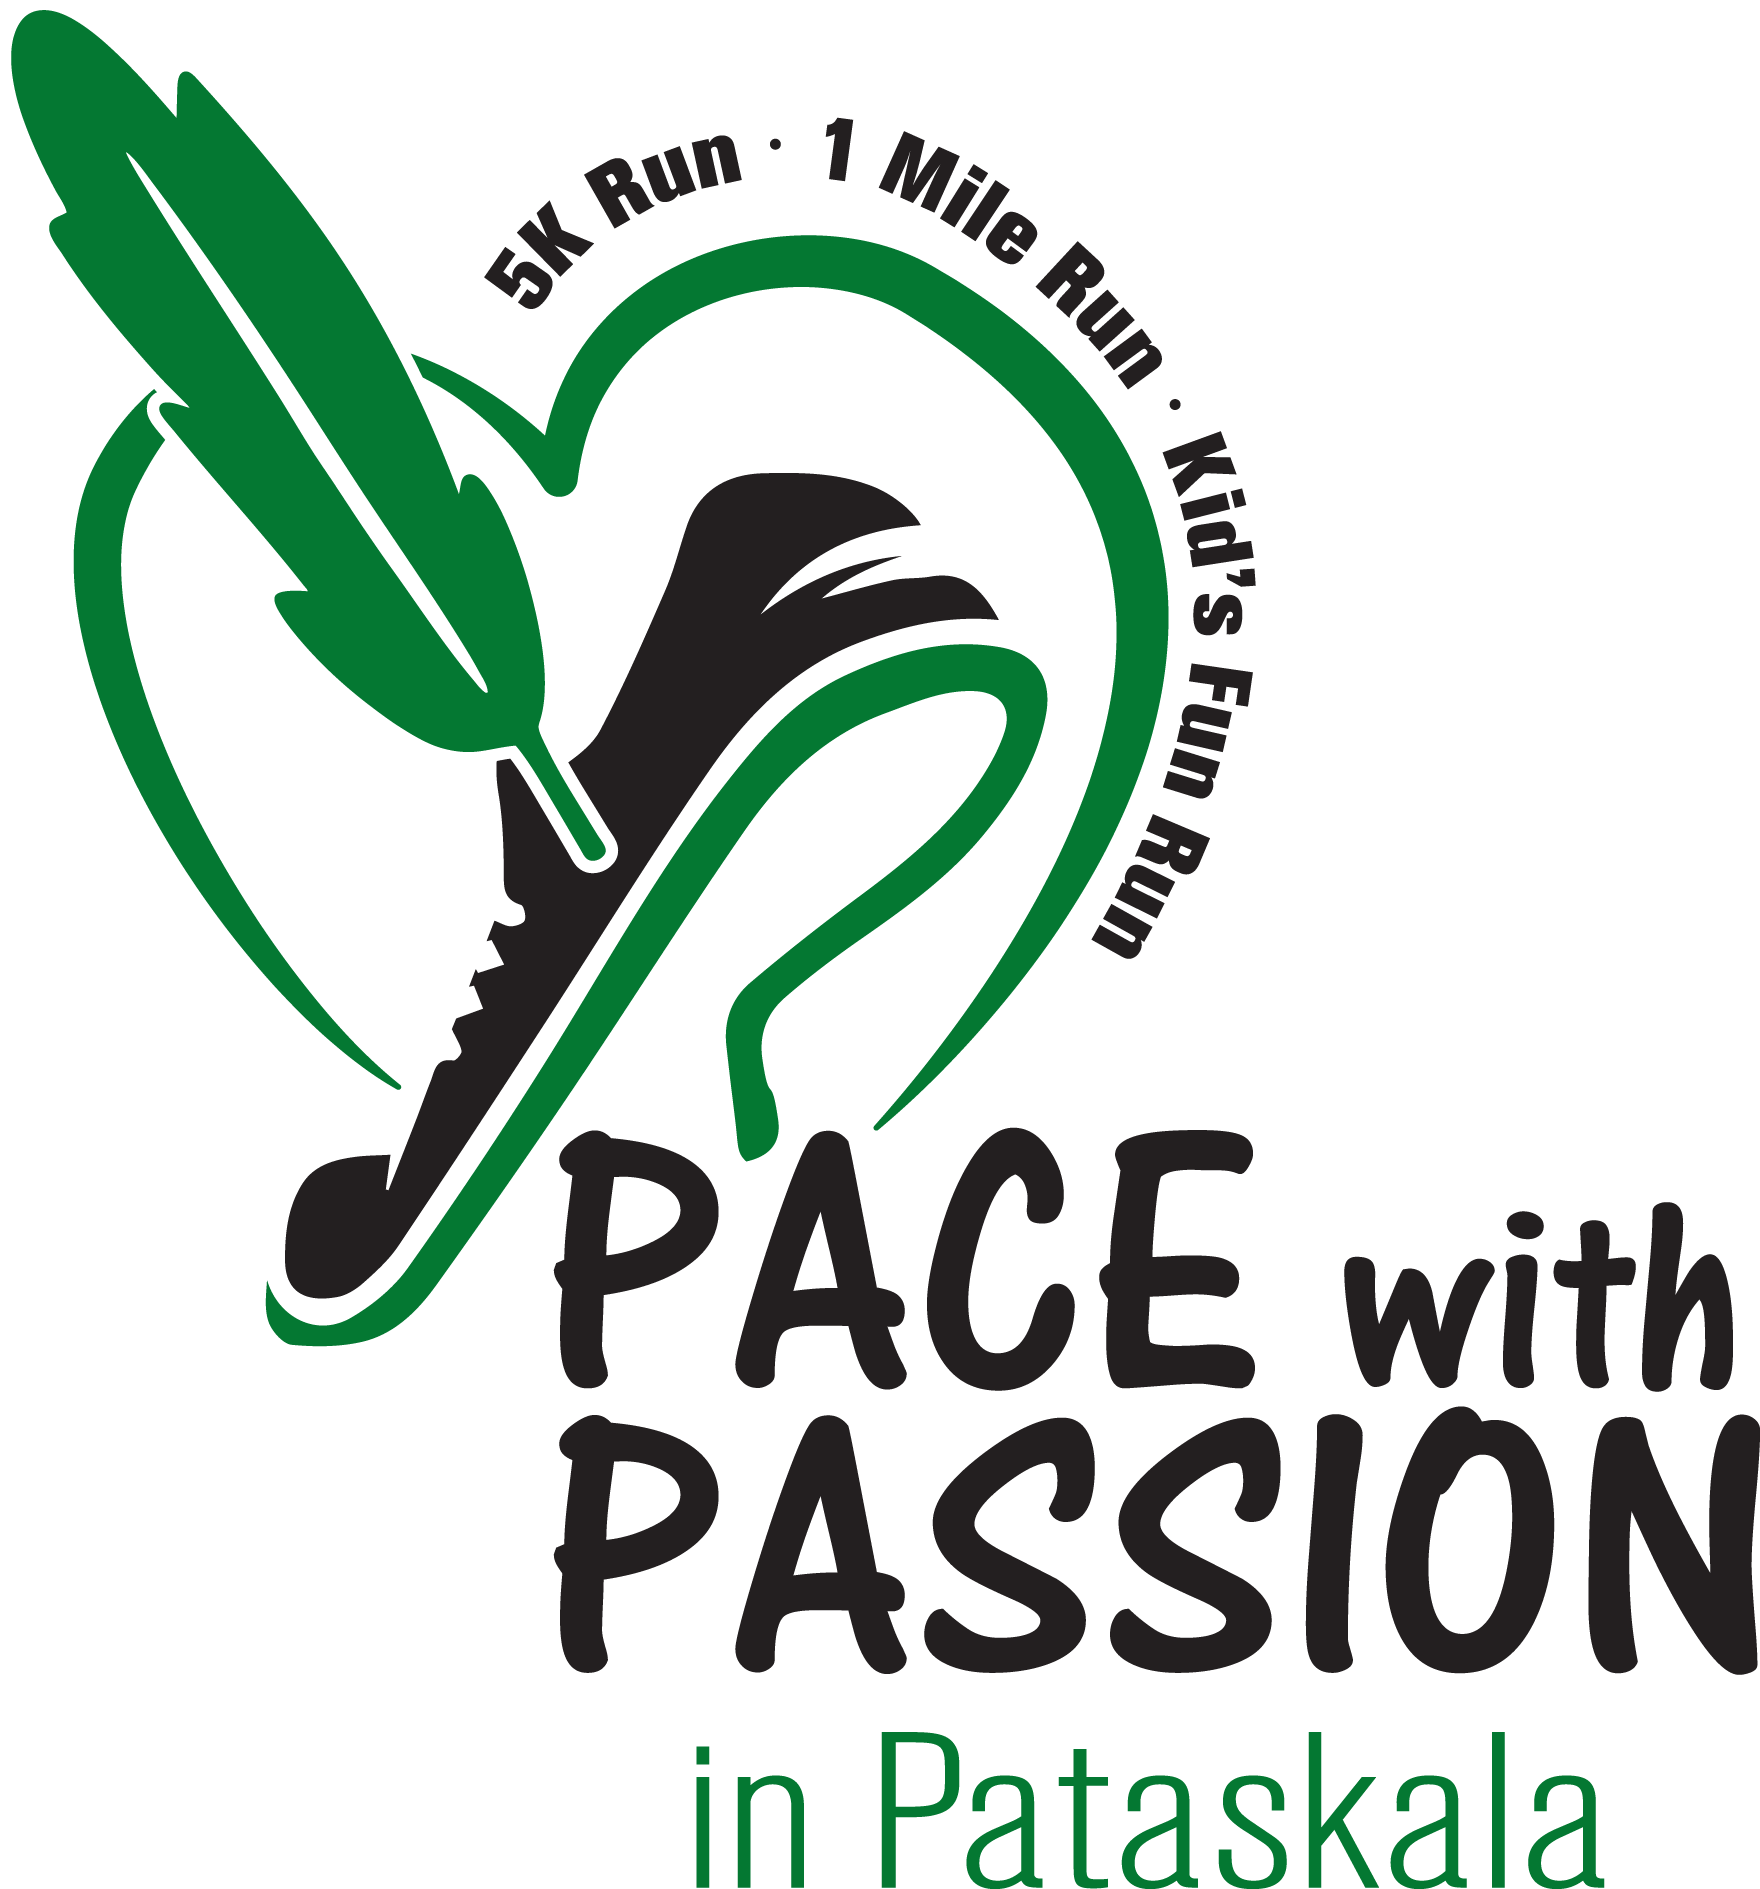 Pataskala's Pace With Passion 5k, 1 Mile and Kids Fun Run